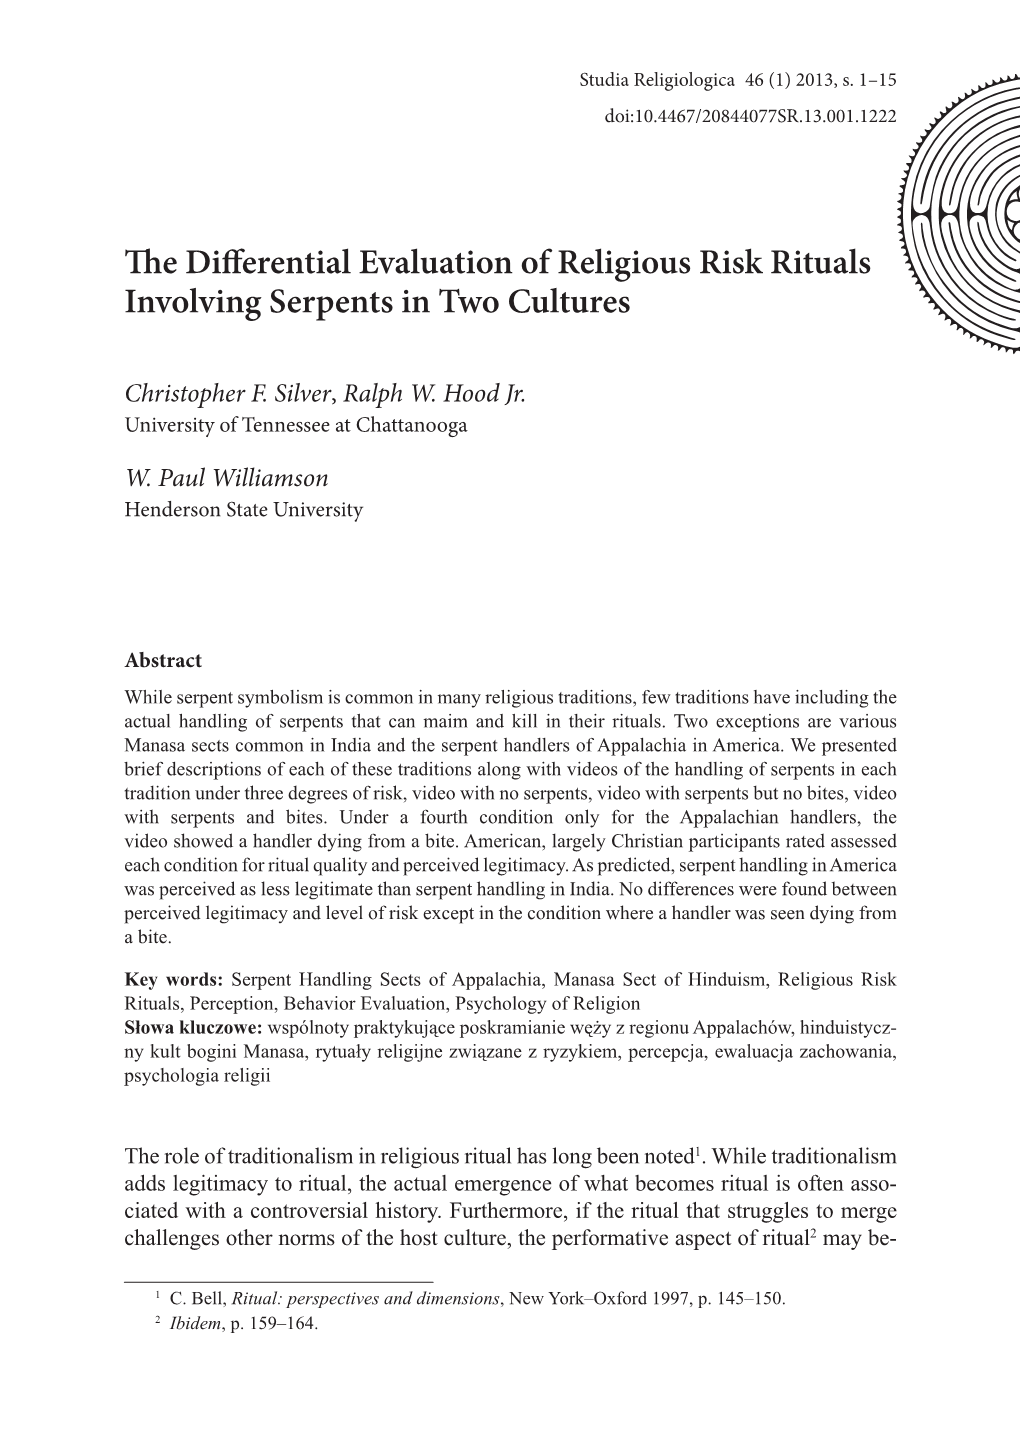 The Differential Evaluation of Religious Risk Rituals Involving Serpents in Two Cultures